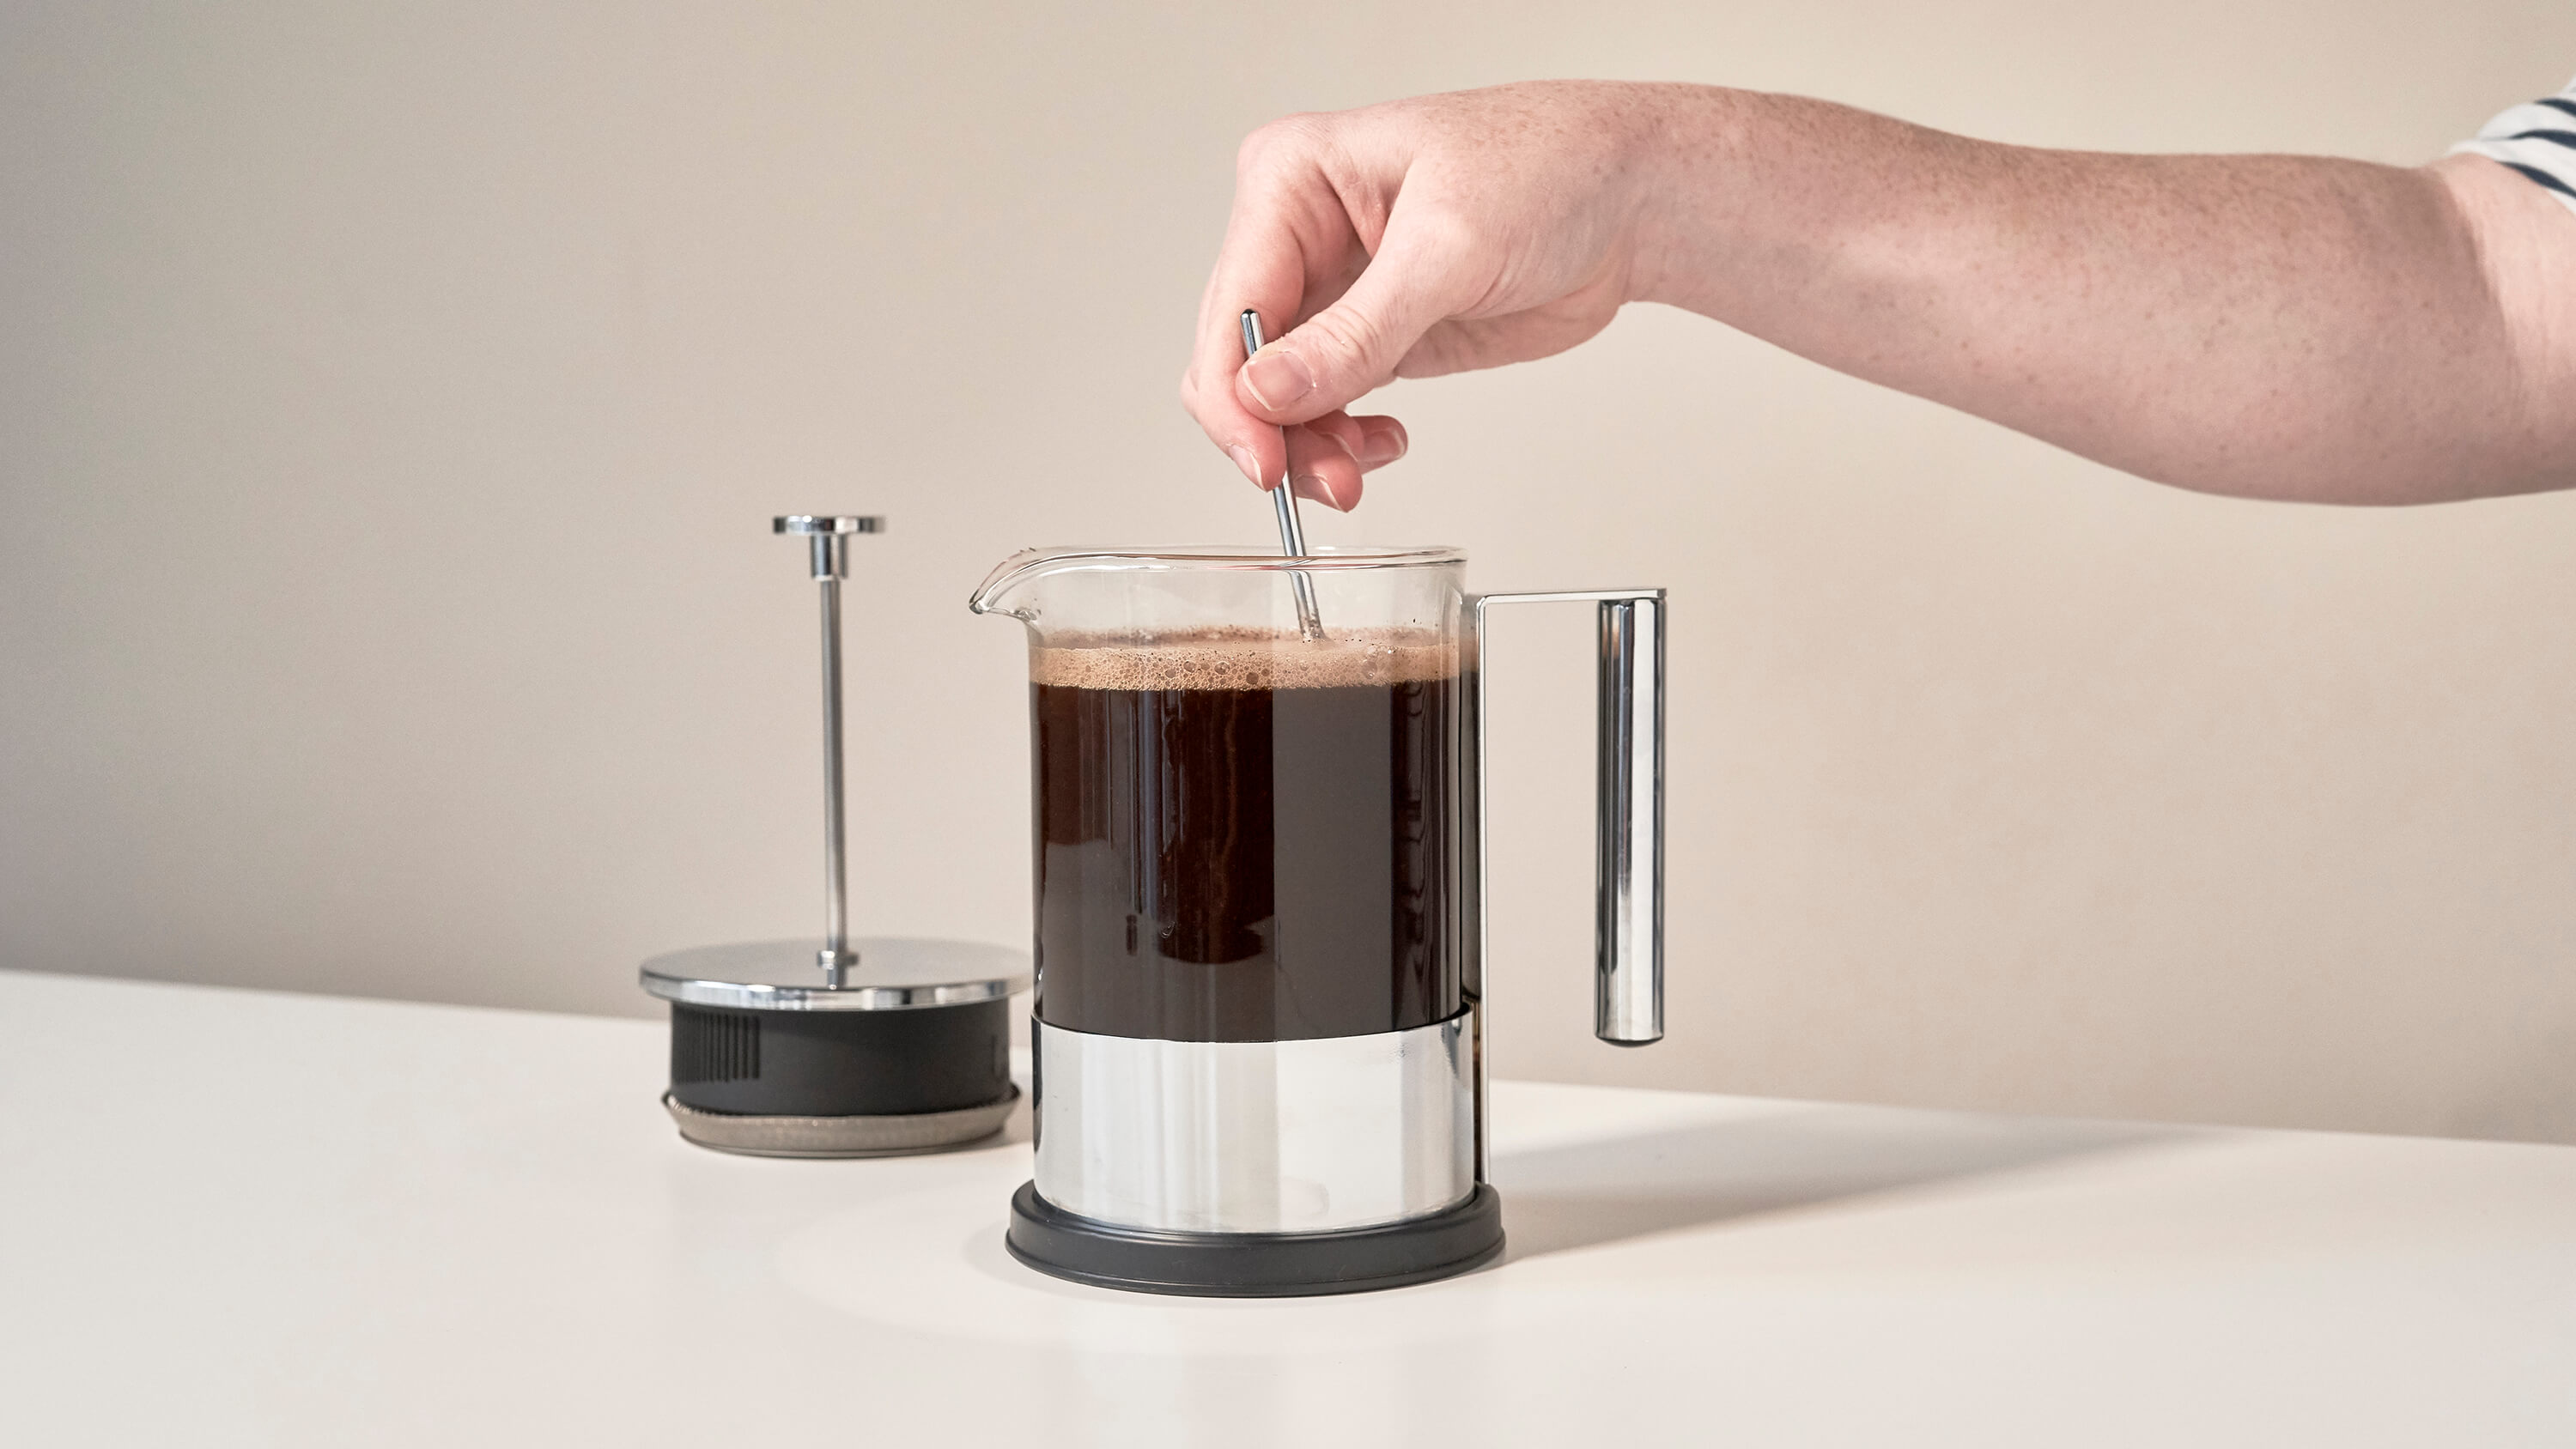 Make Coffee With The French Press or Plunger - The easy way! 